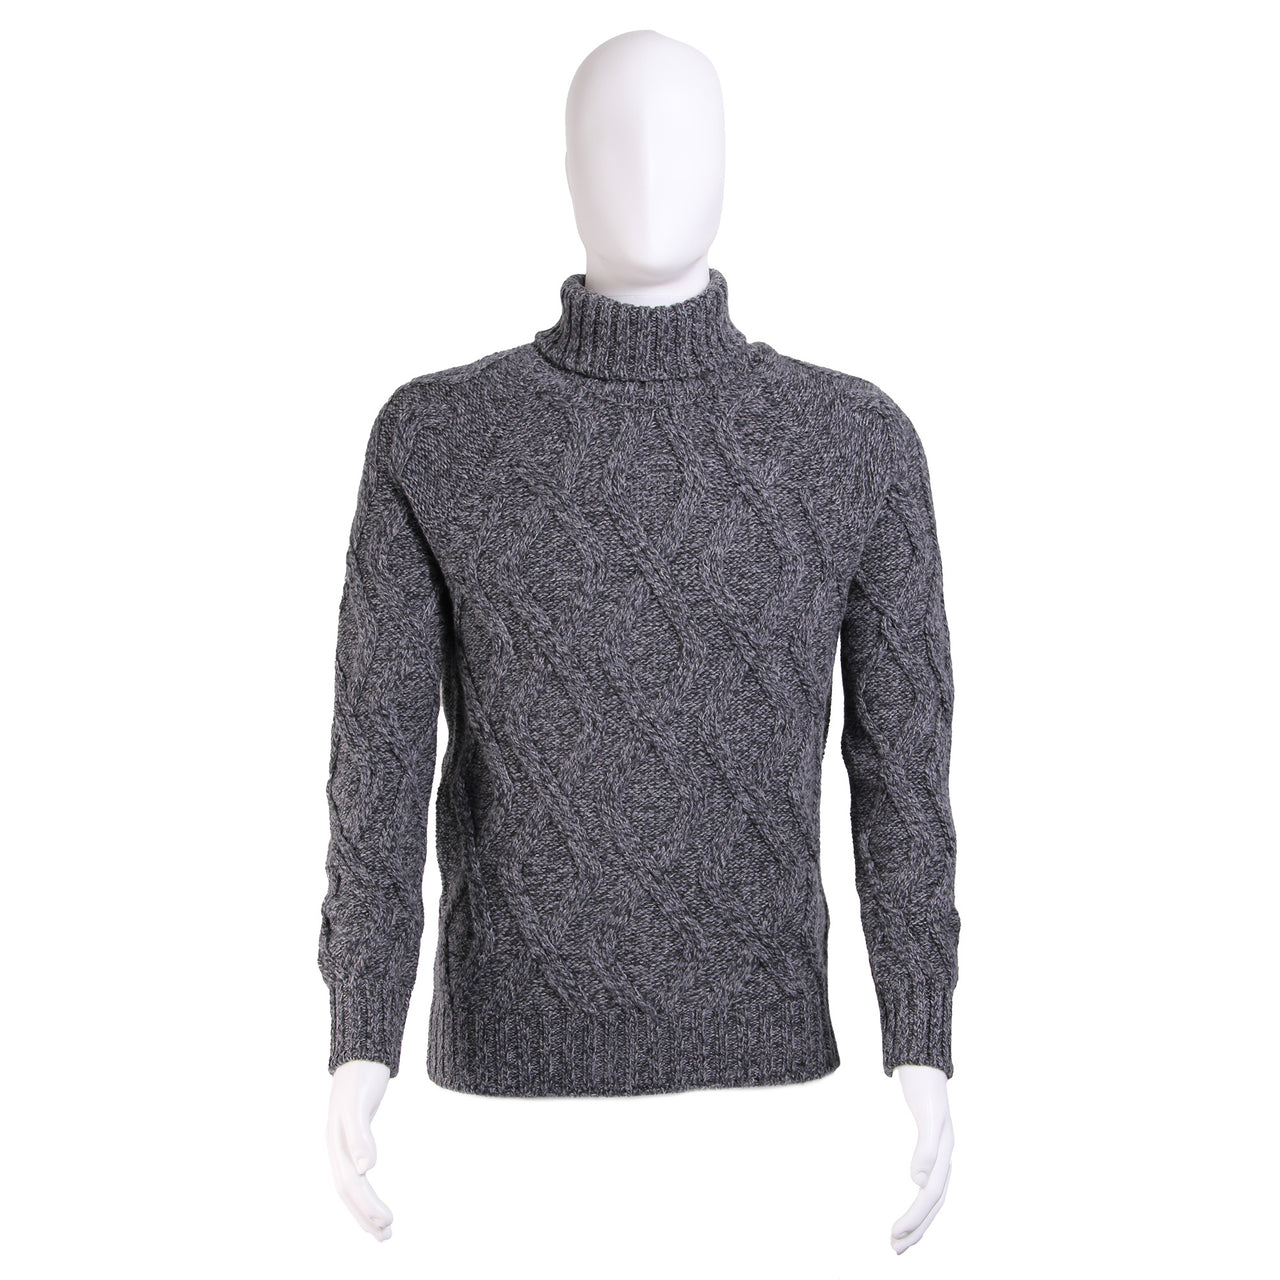 GRAN SASSO Super Geelong Lambswool Roll Neck Cable Knit GREY/CHARCOAL